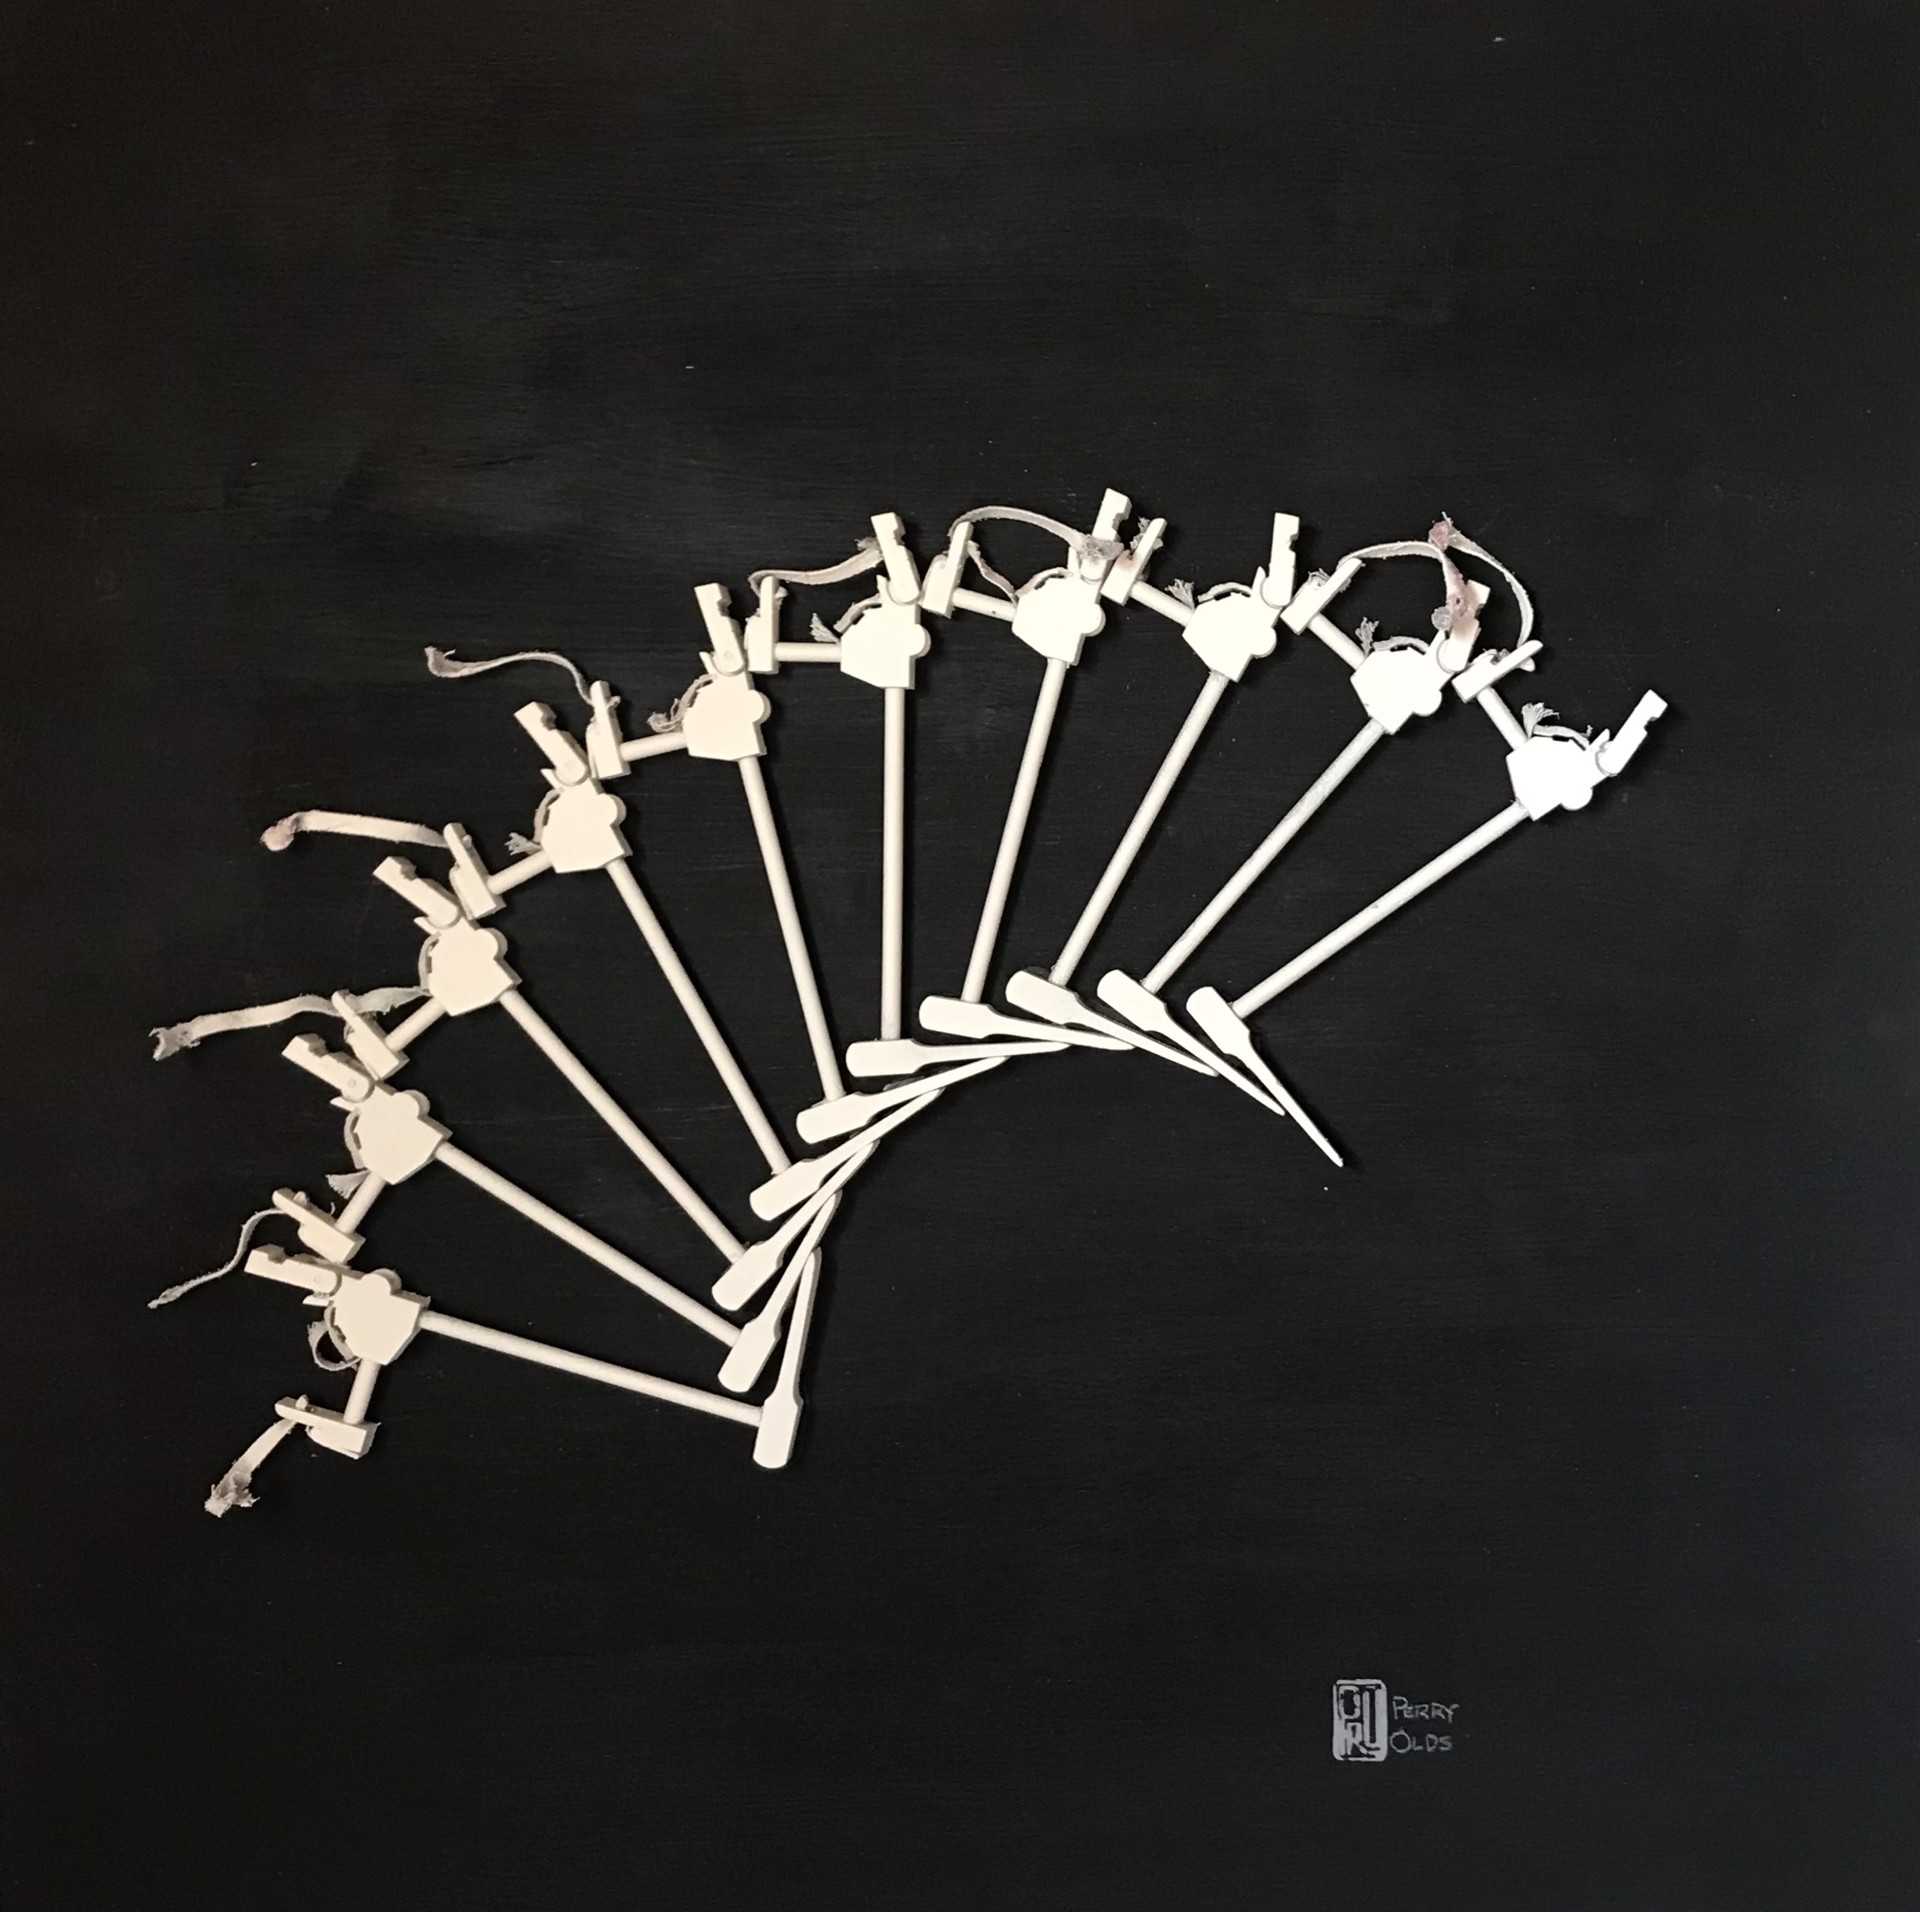 Piano Bones by Perry Olds